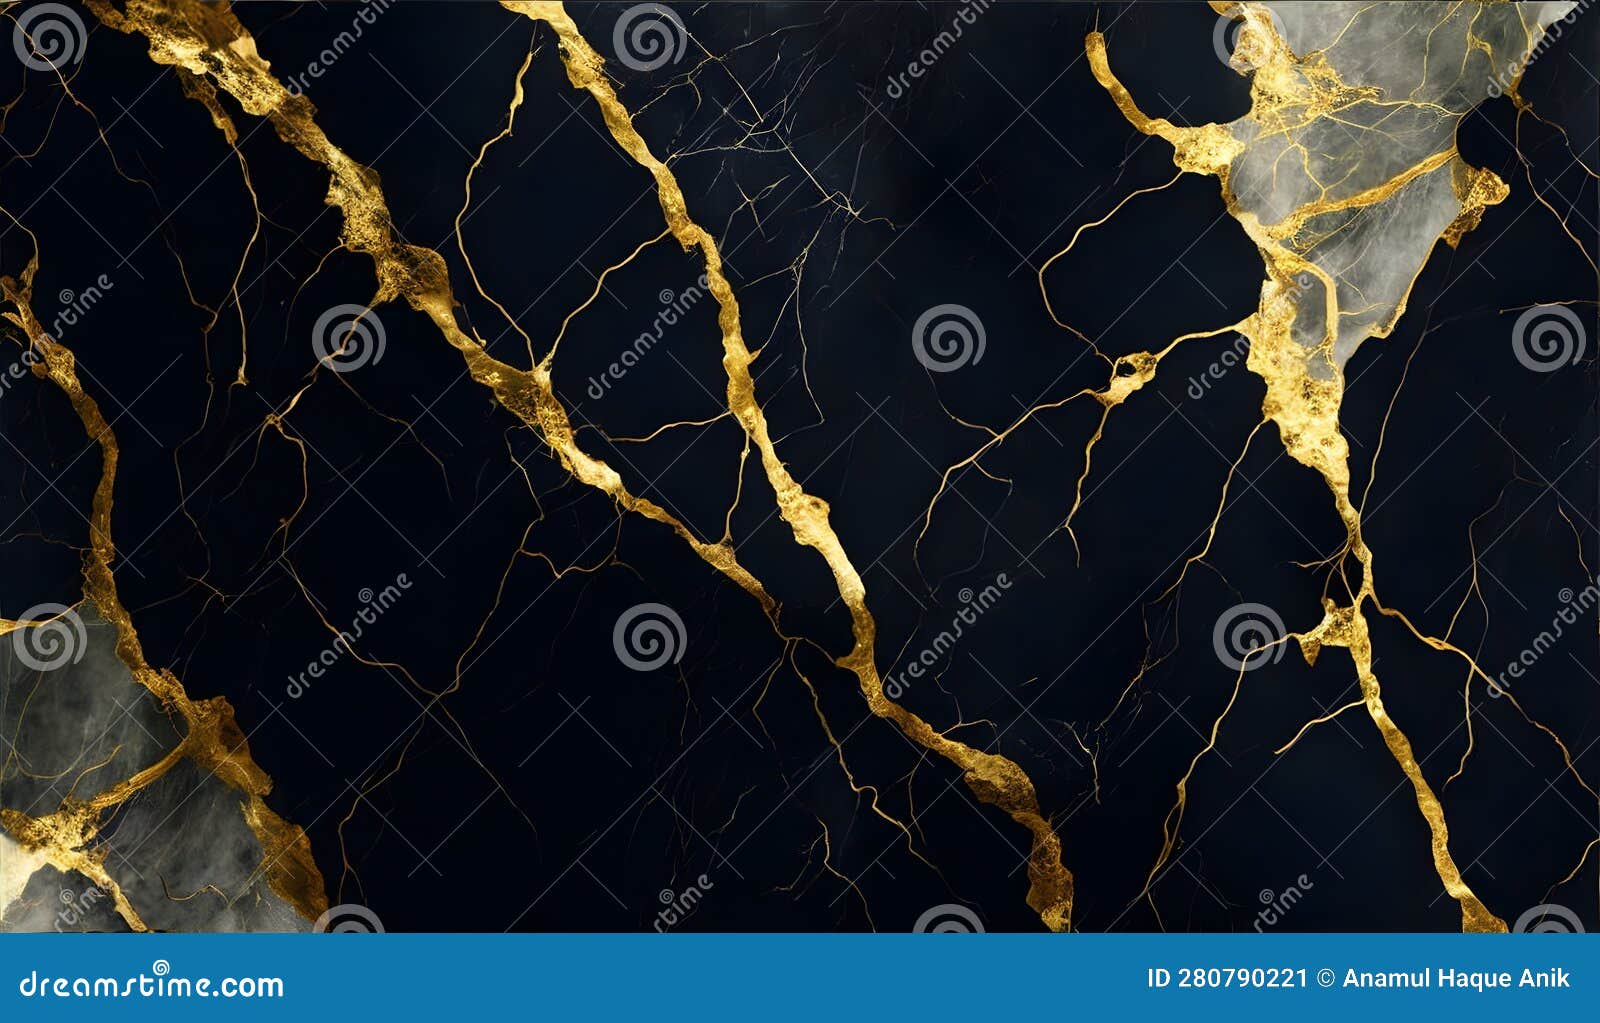 abstract black marble background with golden veins, japanese kintsugi technique